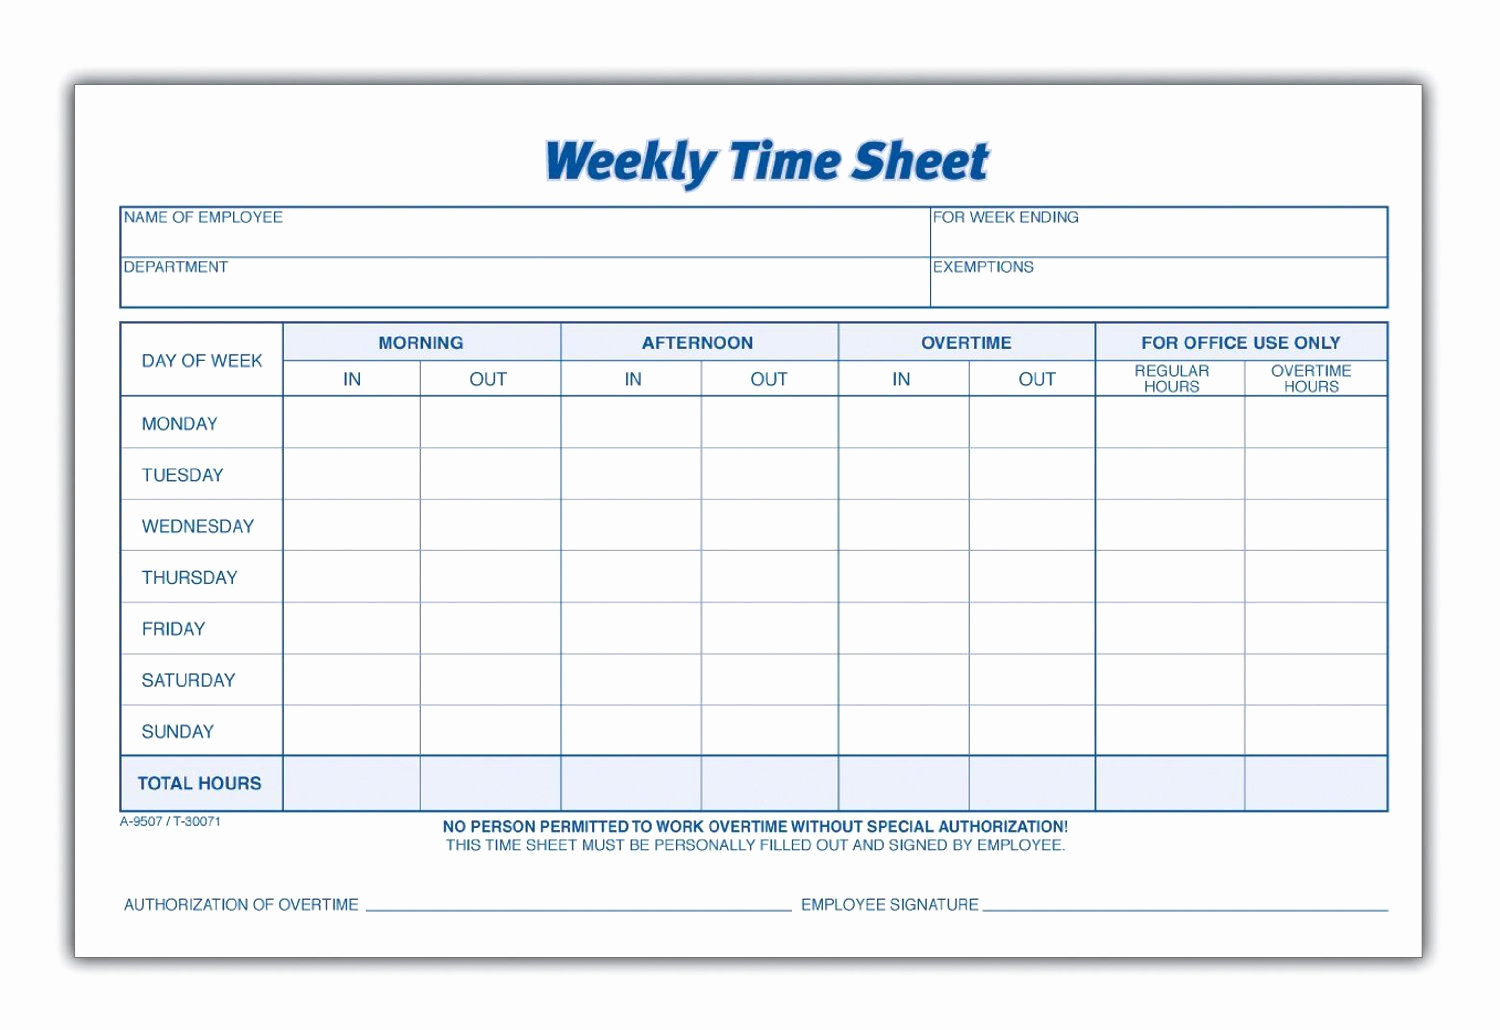 Monthly Attendance Sheet With Time In Excel Free Download